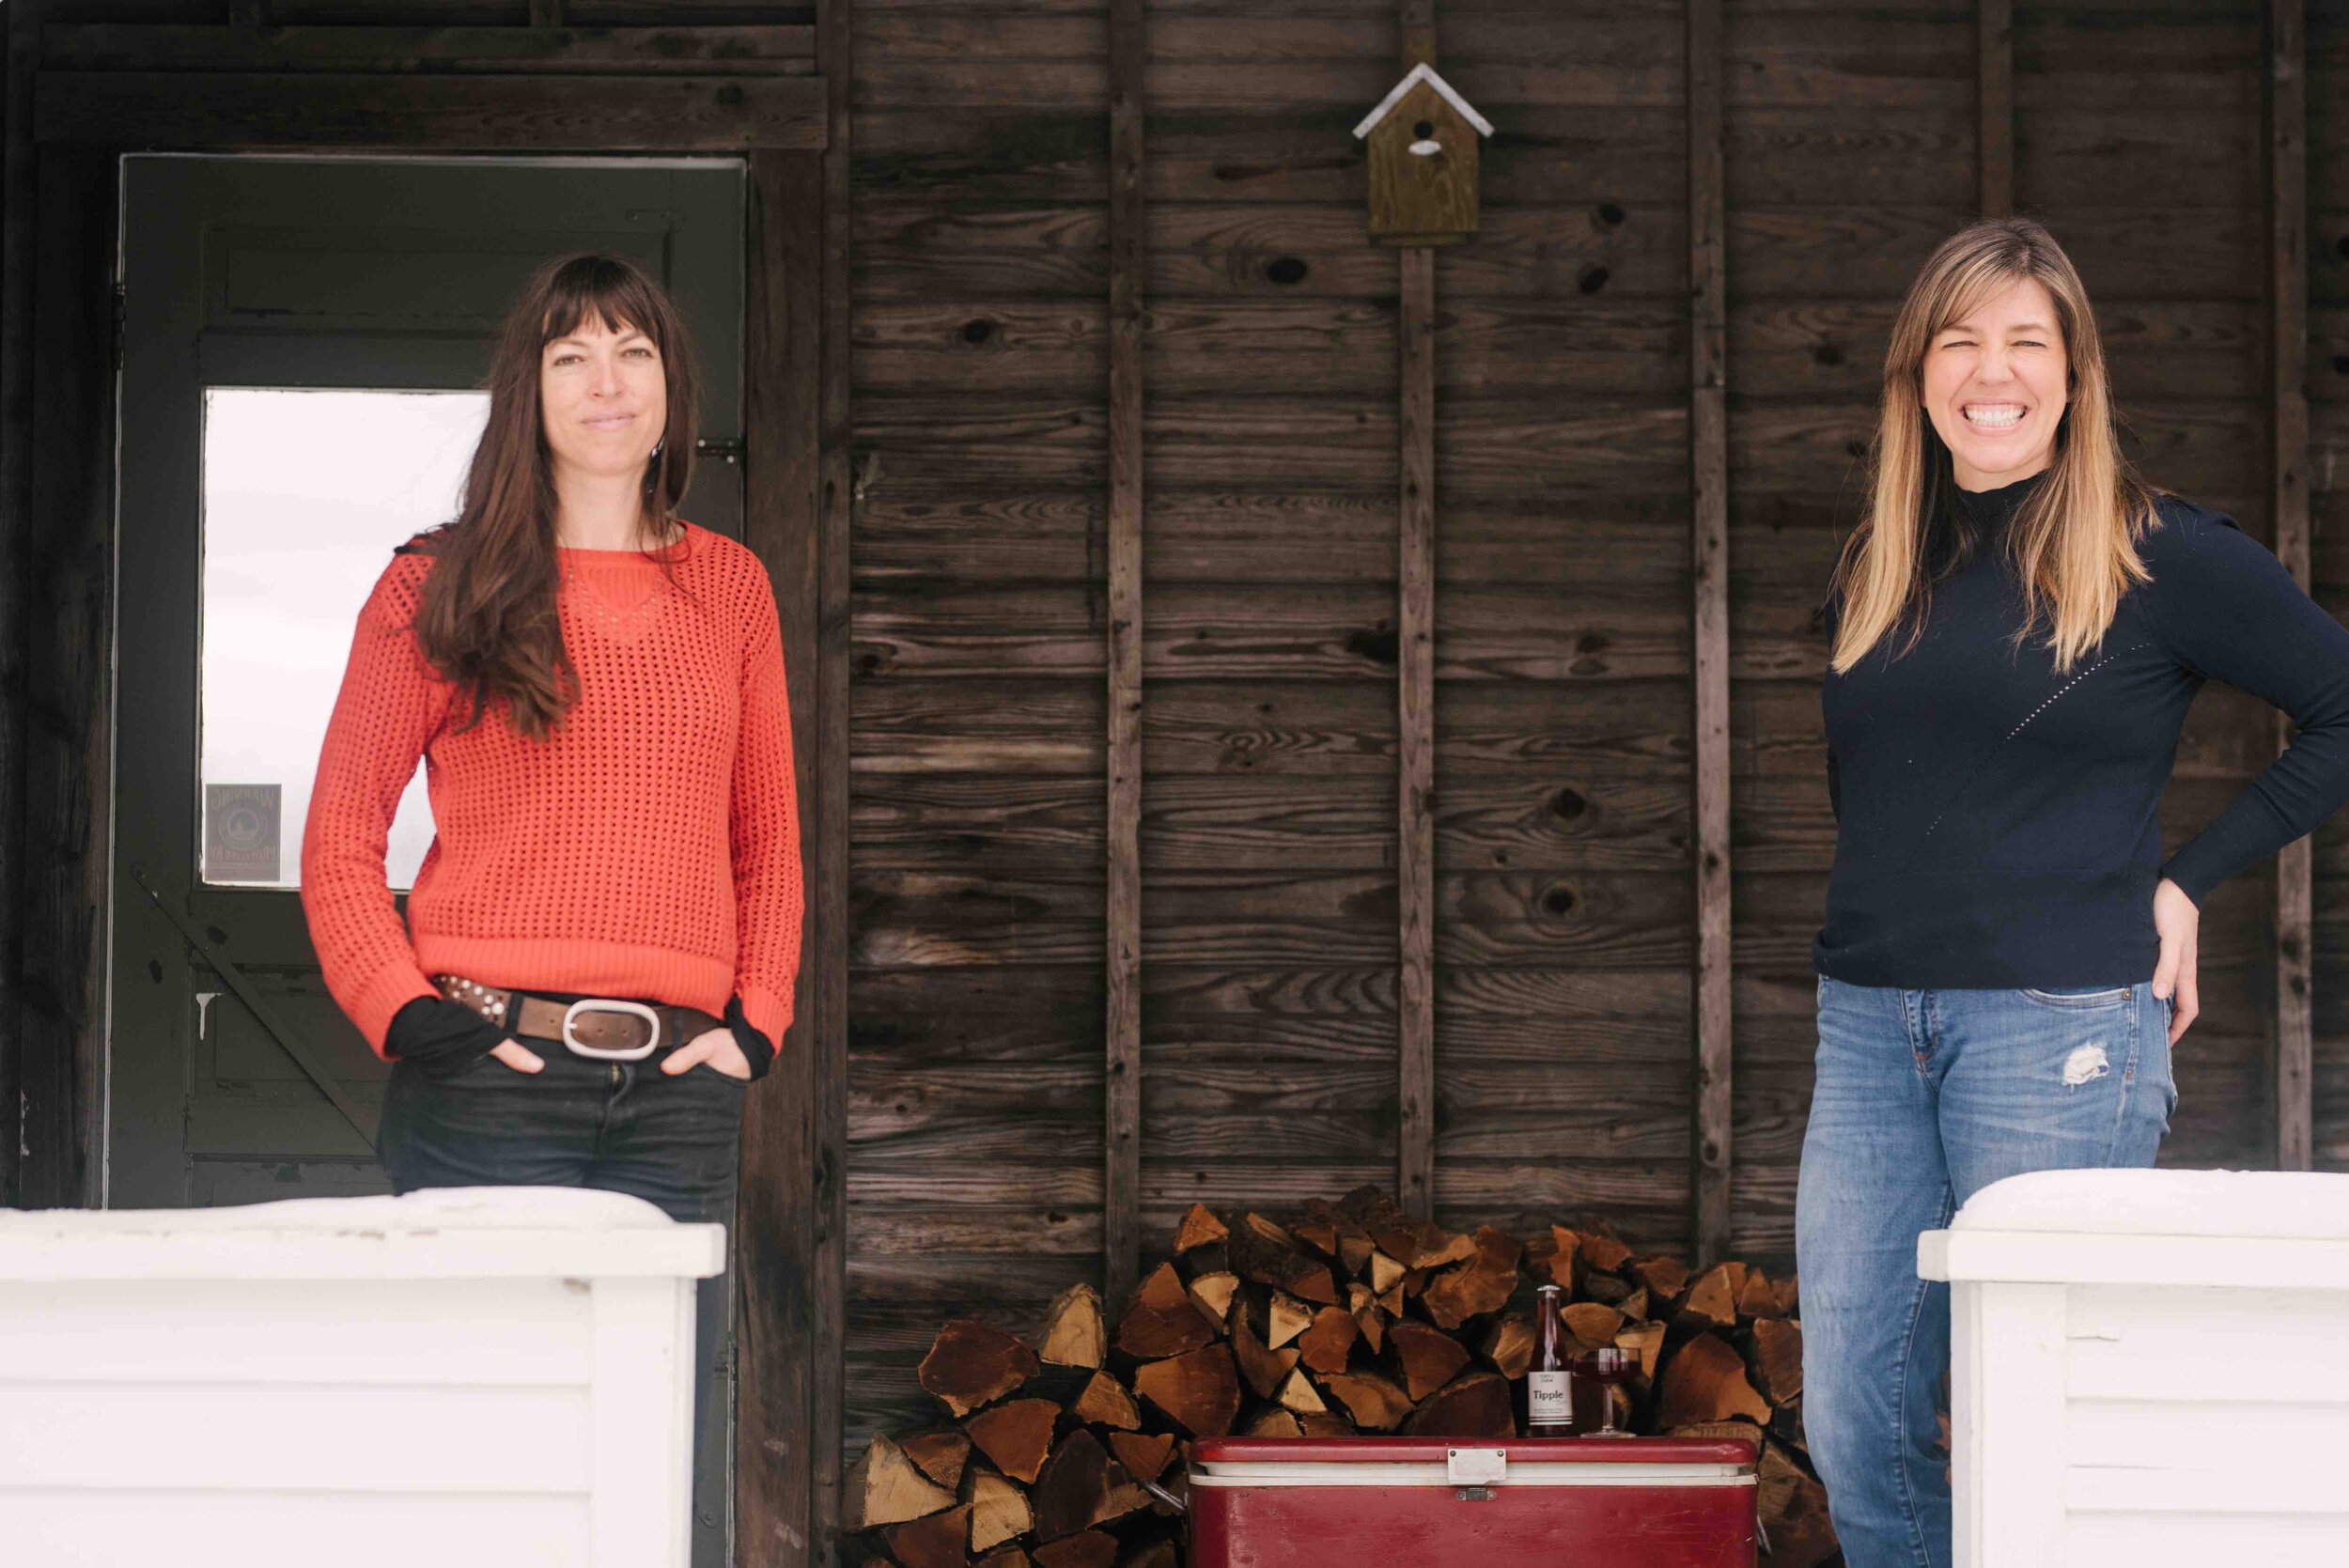  Sarah Pike (right) is joined by her sister-in- law Rachel Bell, owner and operator of Long Lost Farm of Tide Mill, which provides artisan cheeses for Tops’l guests. 